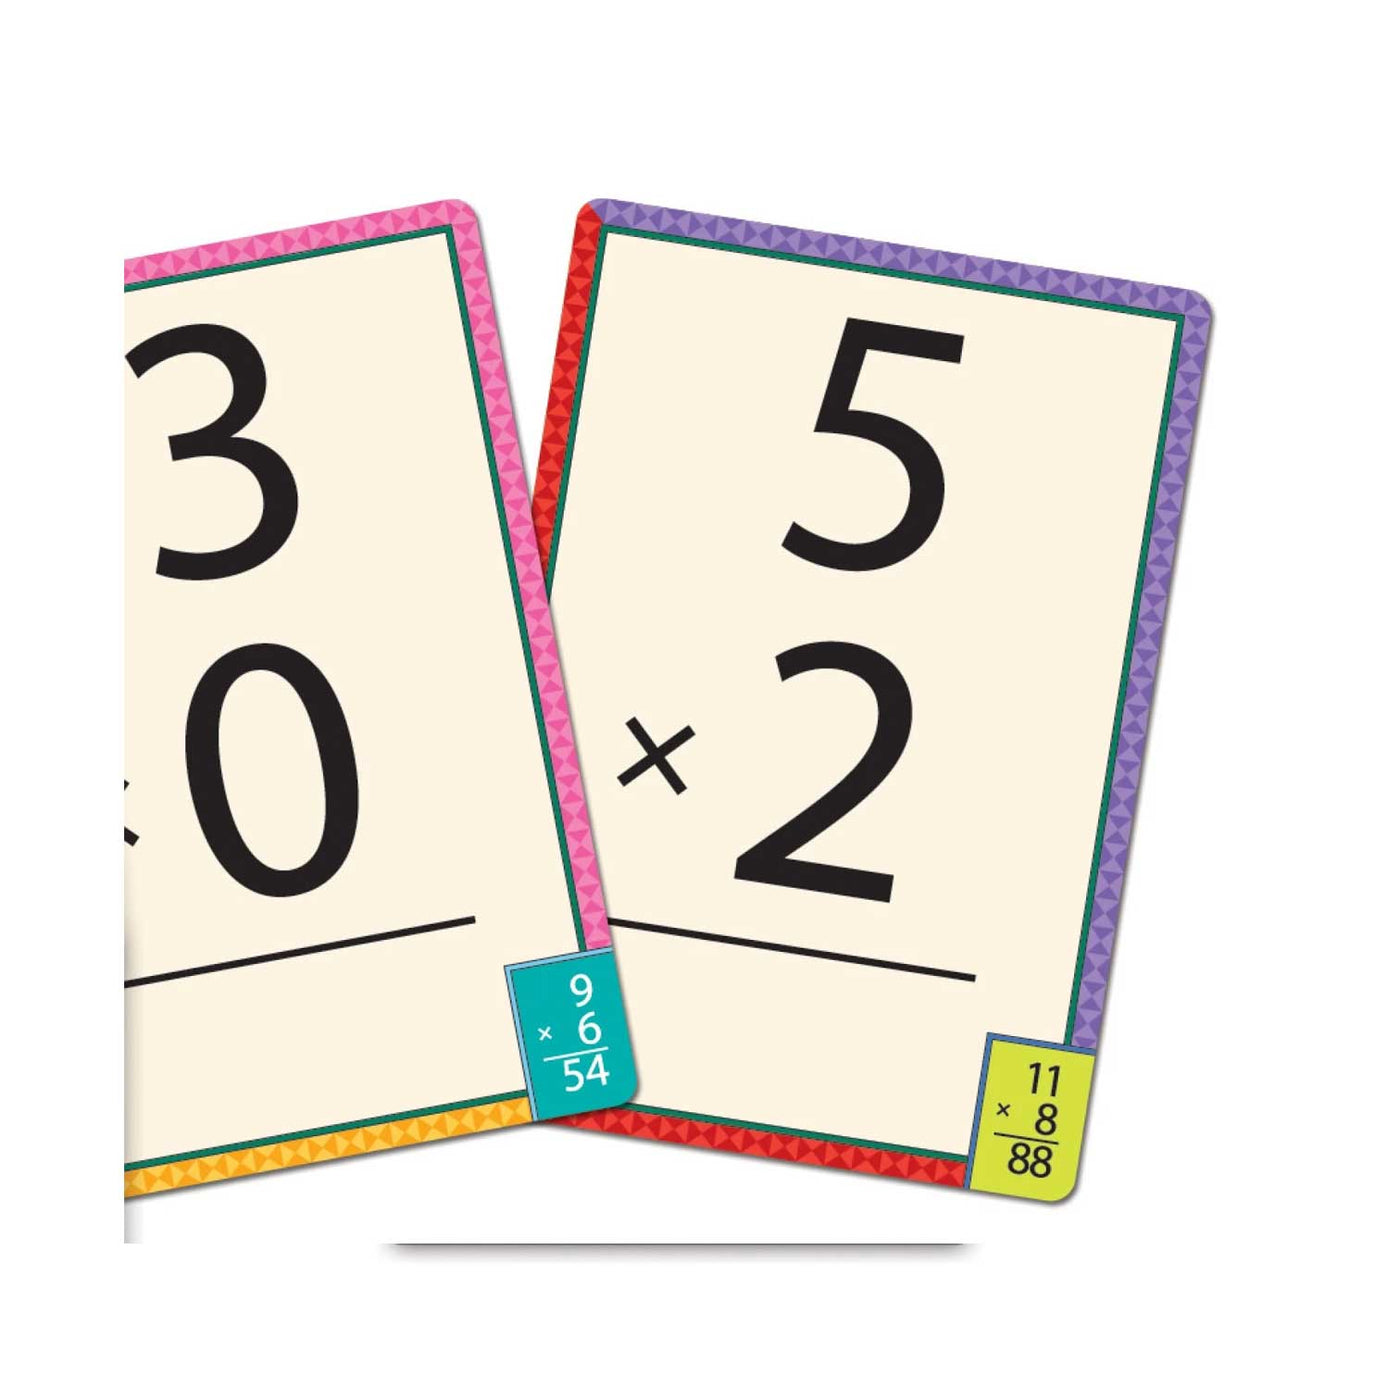 Multiplication Flash Cards - Barque Gifts